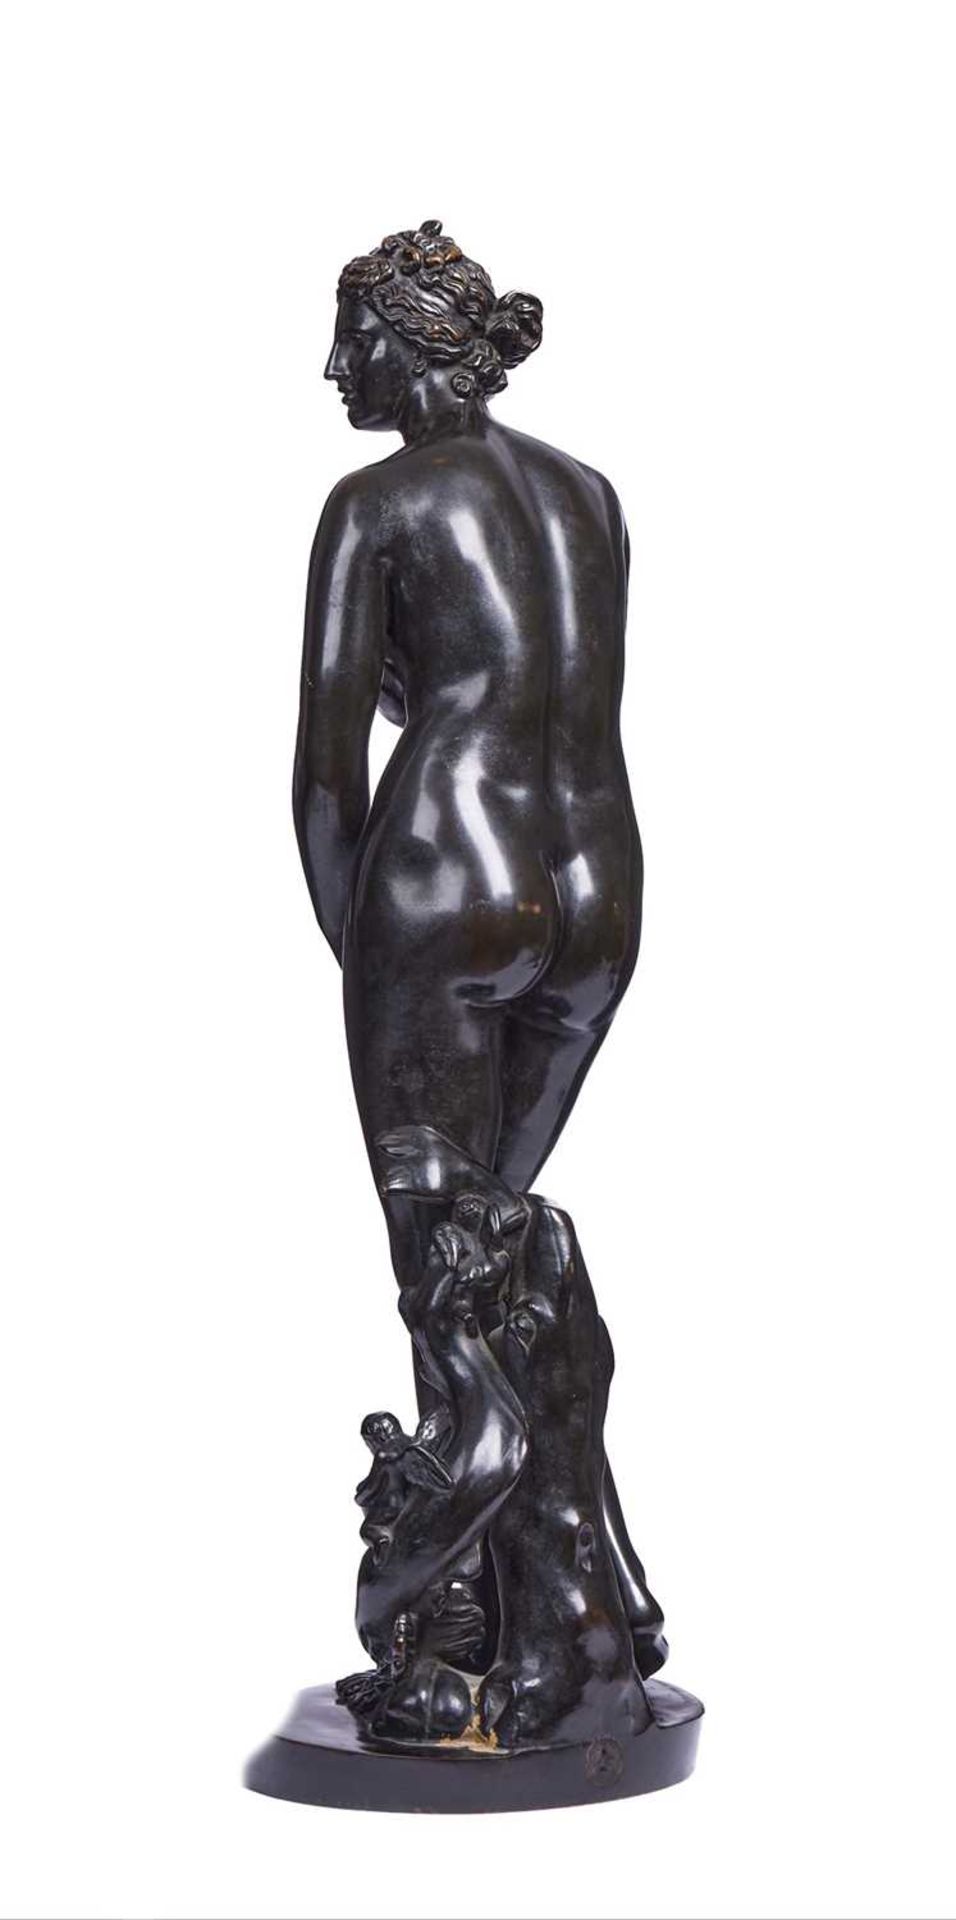 F. BARBEDIENNE: A LARGE 19TH CENTURY BRONZE FIGURE OF THE VENUS DE MEDICI, AFTER THE ANTIQUE - Image 3 of 4